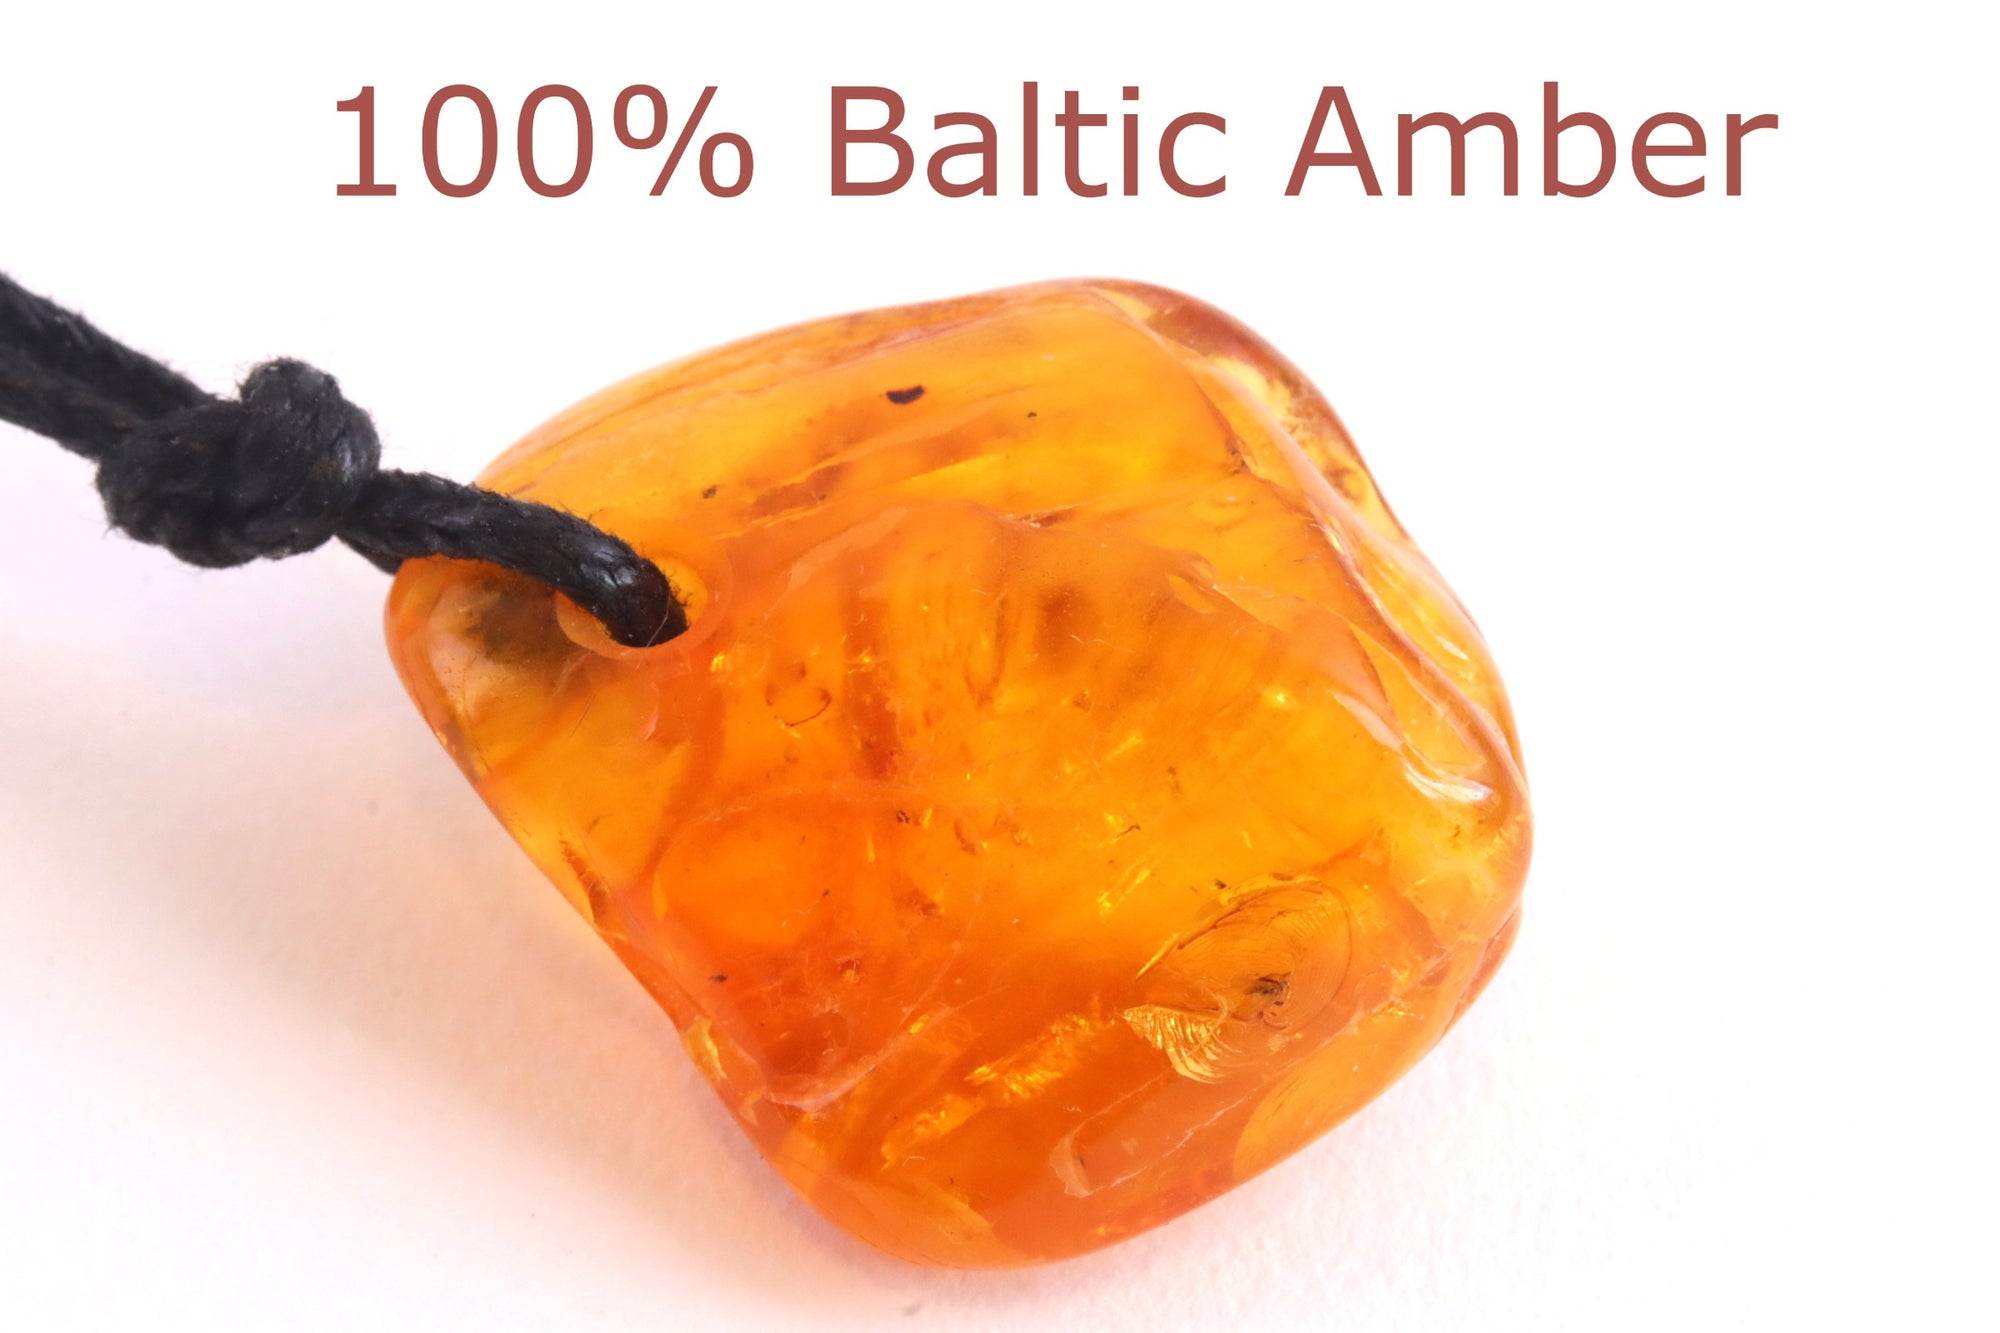 Insect Preserved In 40 million year old Baltic Amber